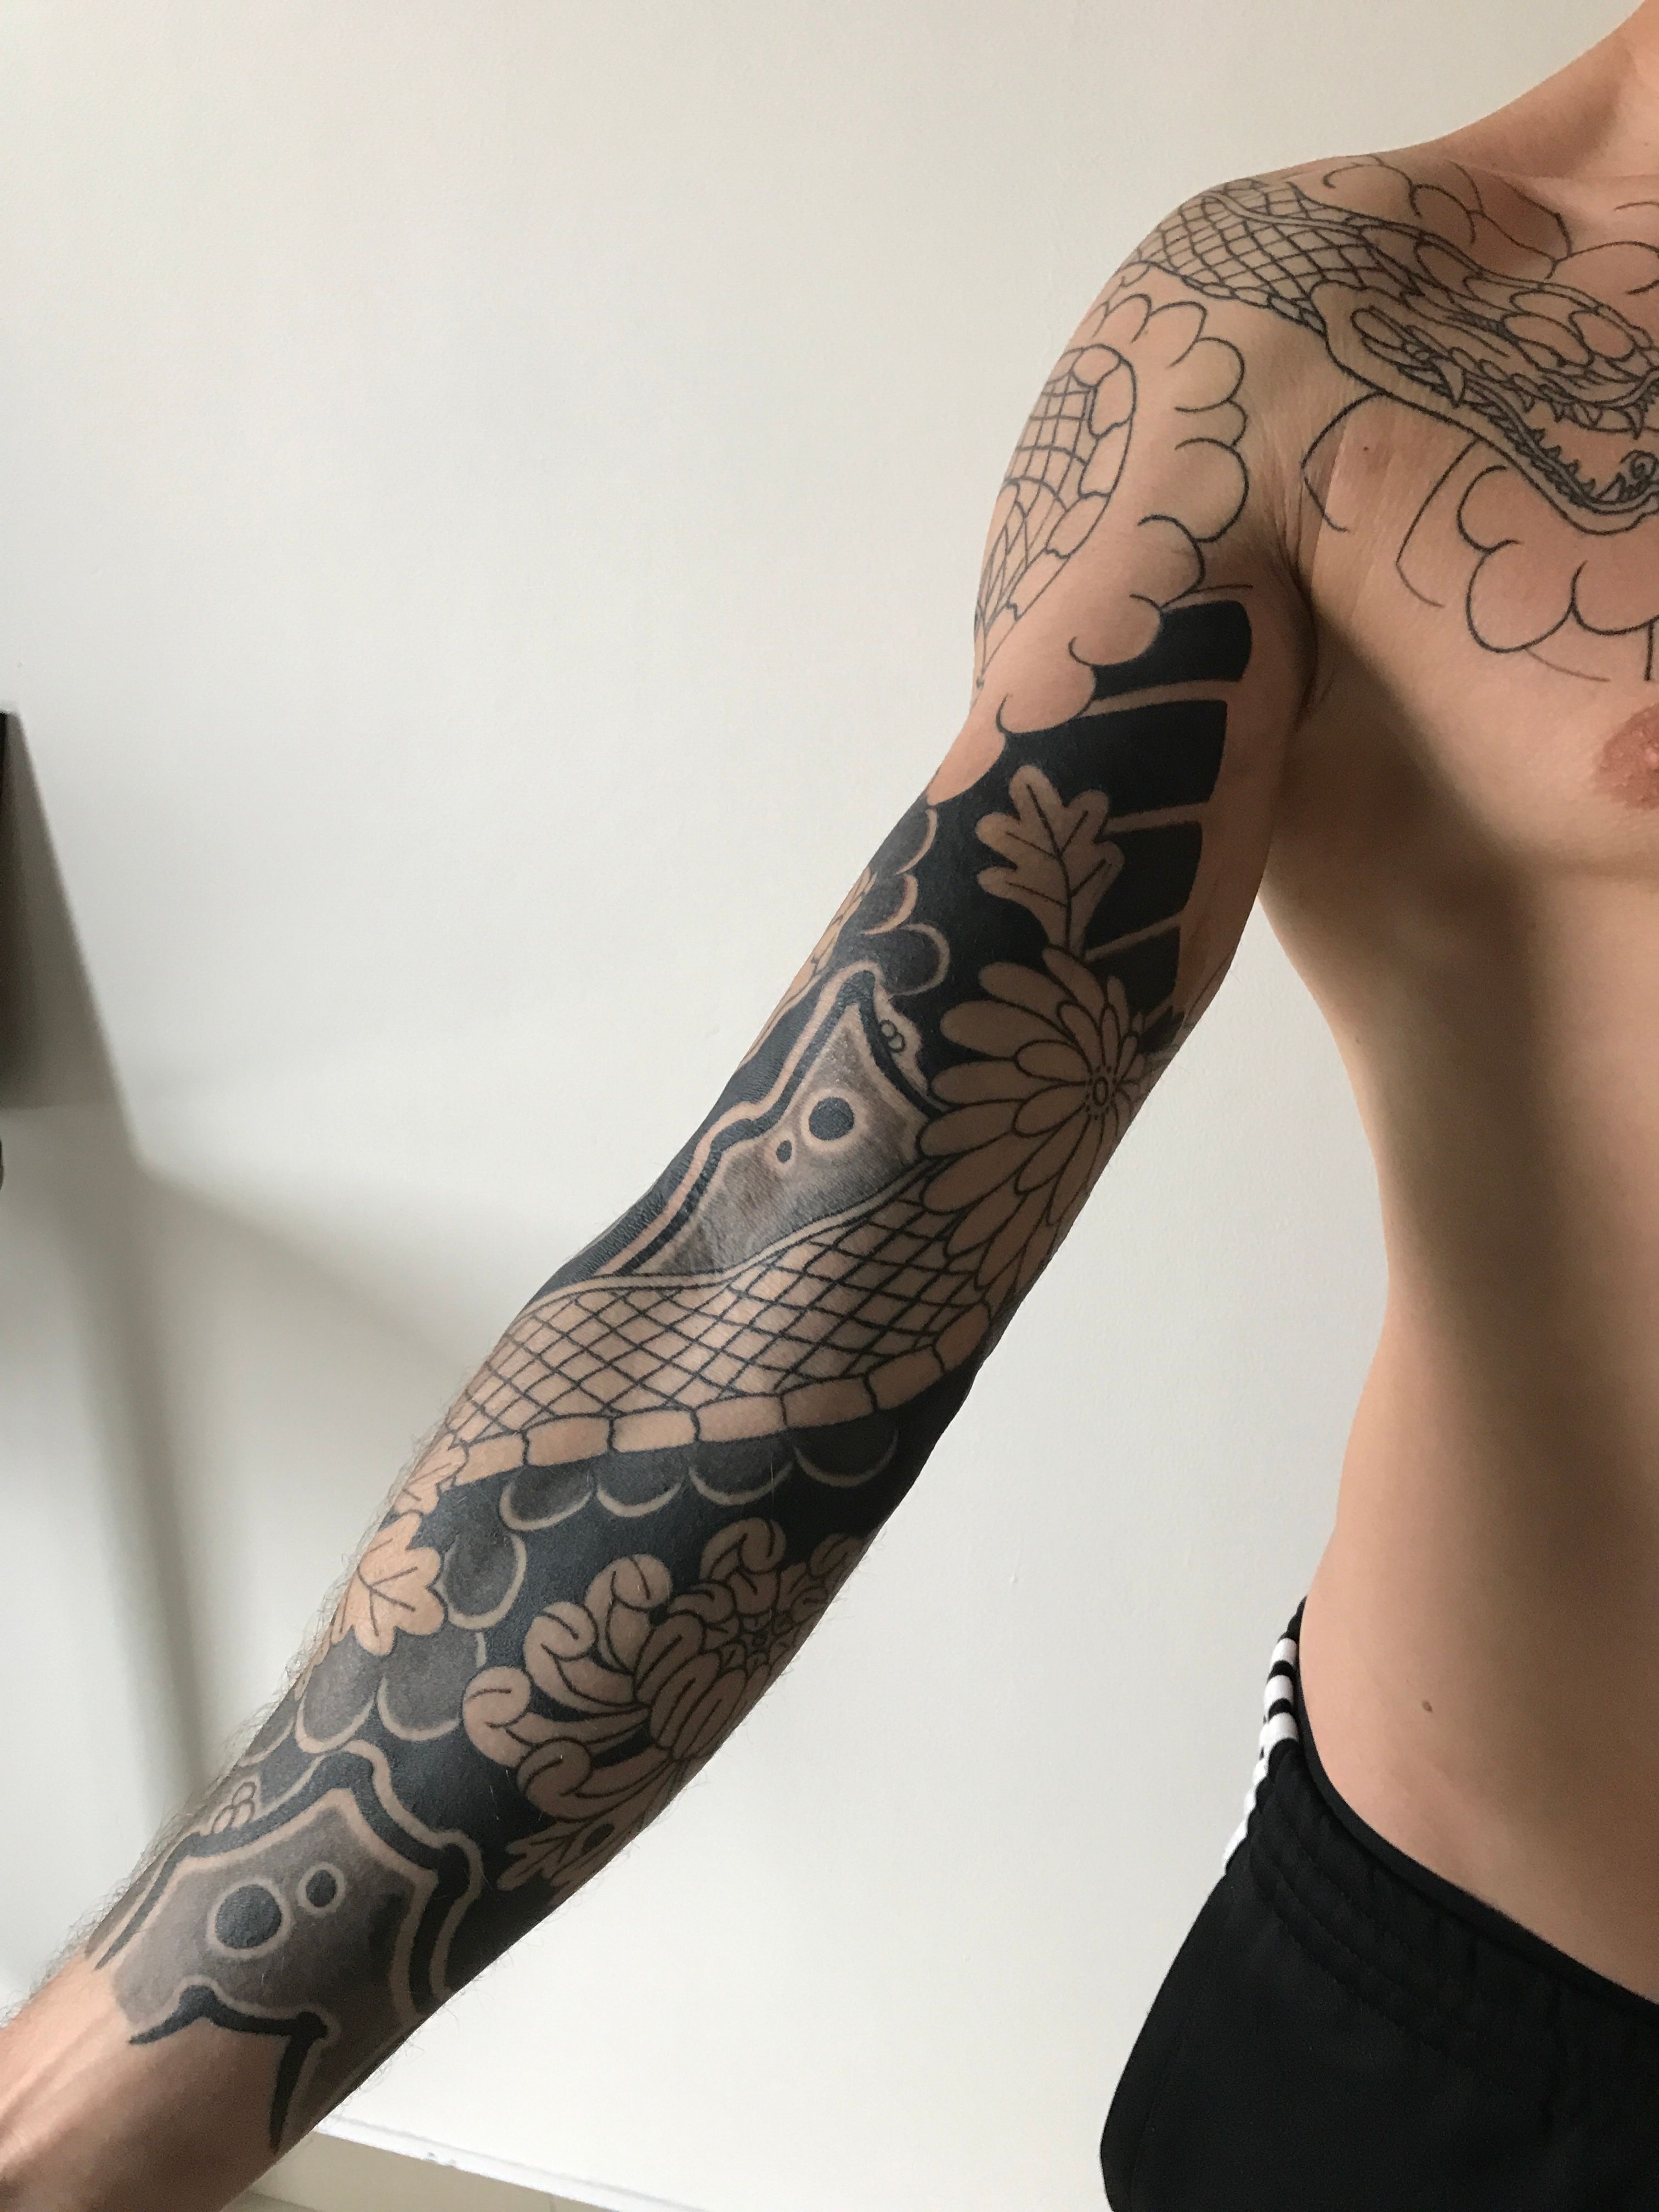 How to design a sleeve tattoo – Stories and Ink